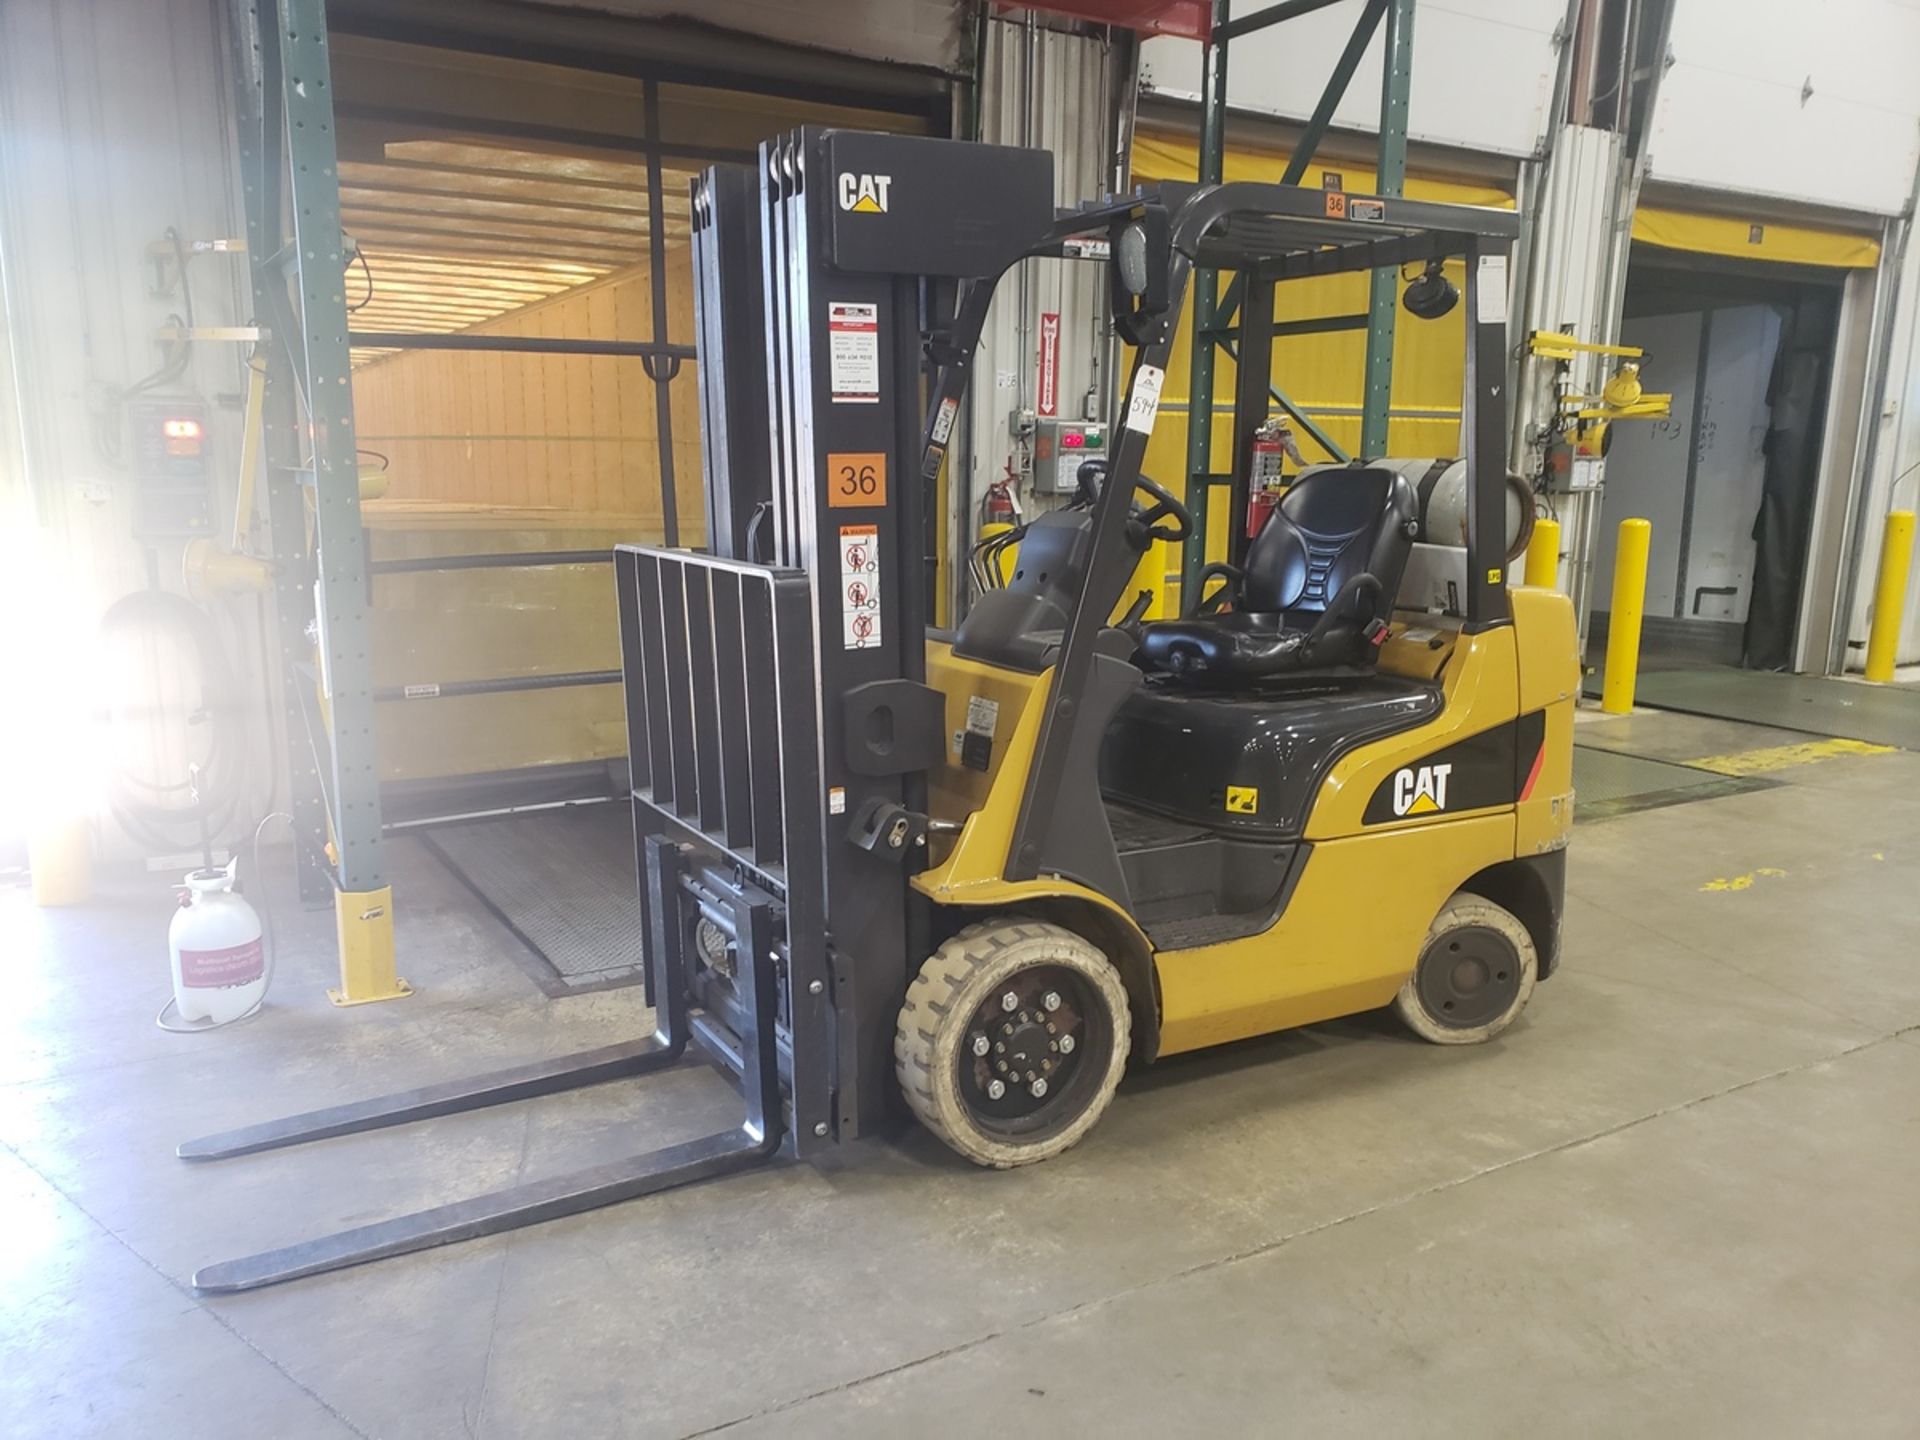 Caterpillar LP Forklift, 2900 Lb Capacity, 5219 Hours, M# 2C5000, S/N AT9041700 | Rig Fee $150